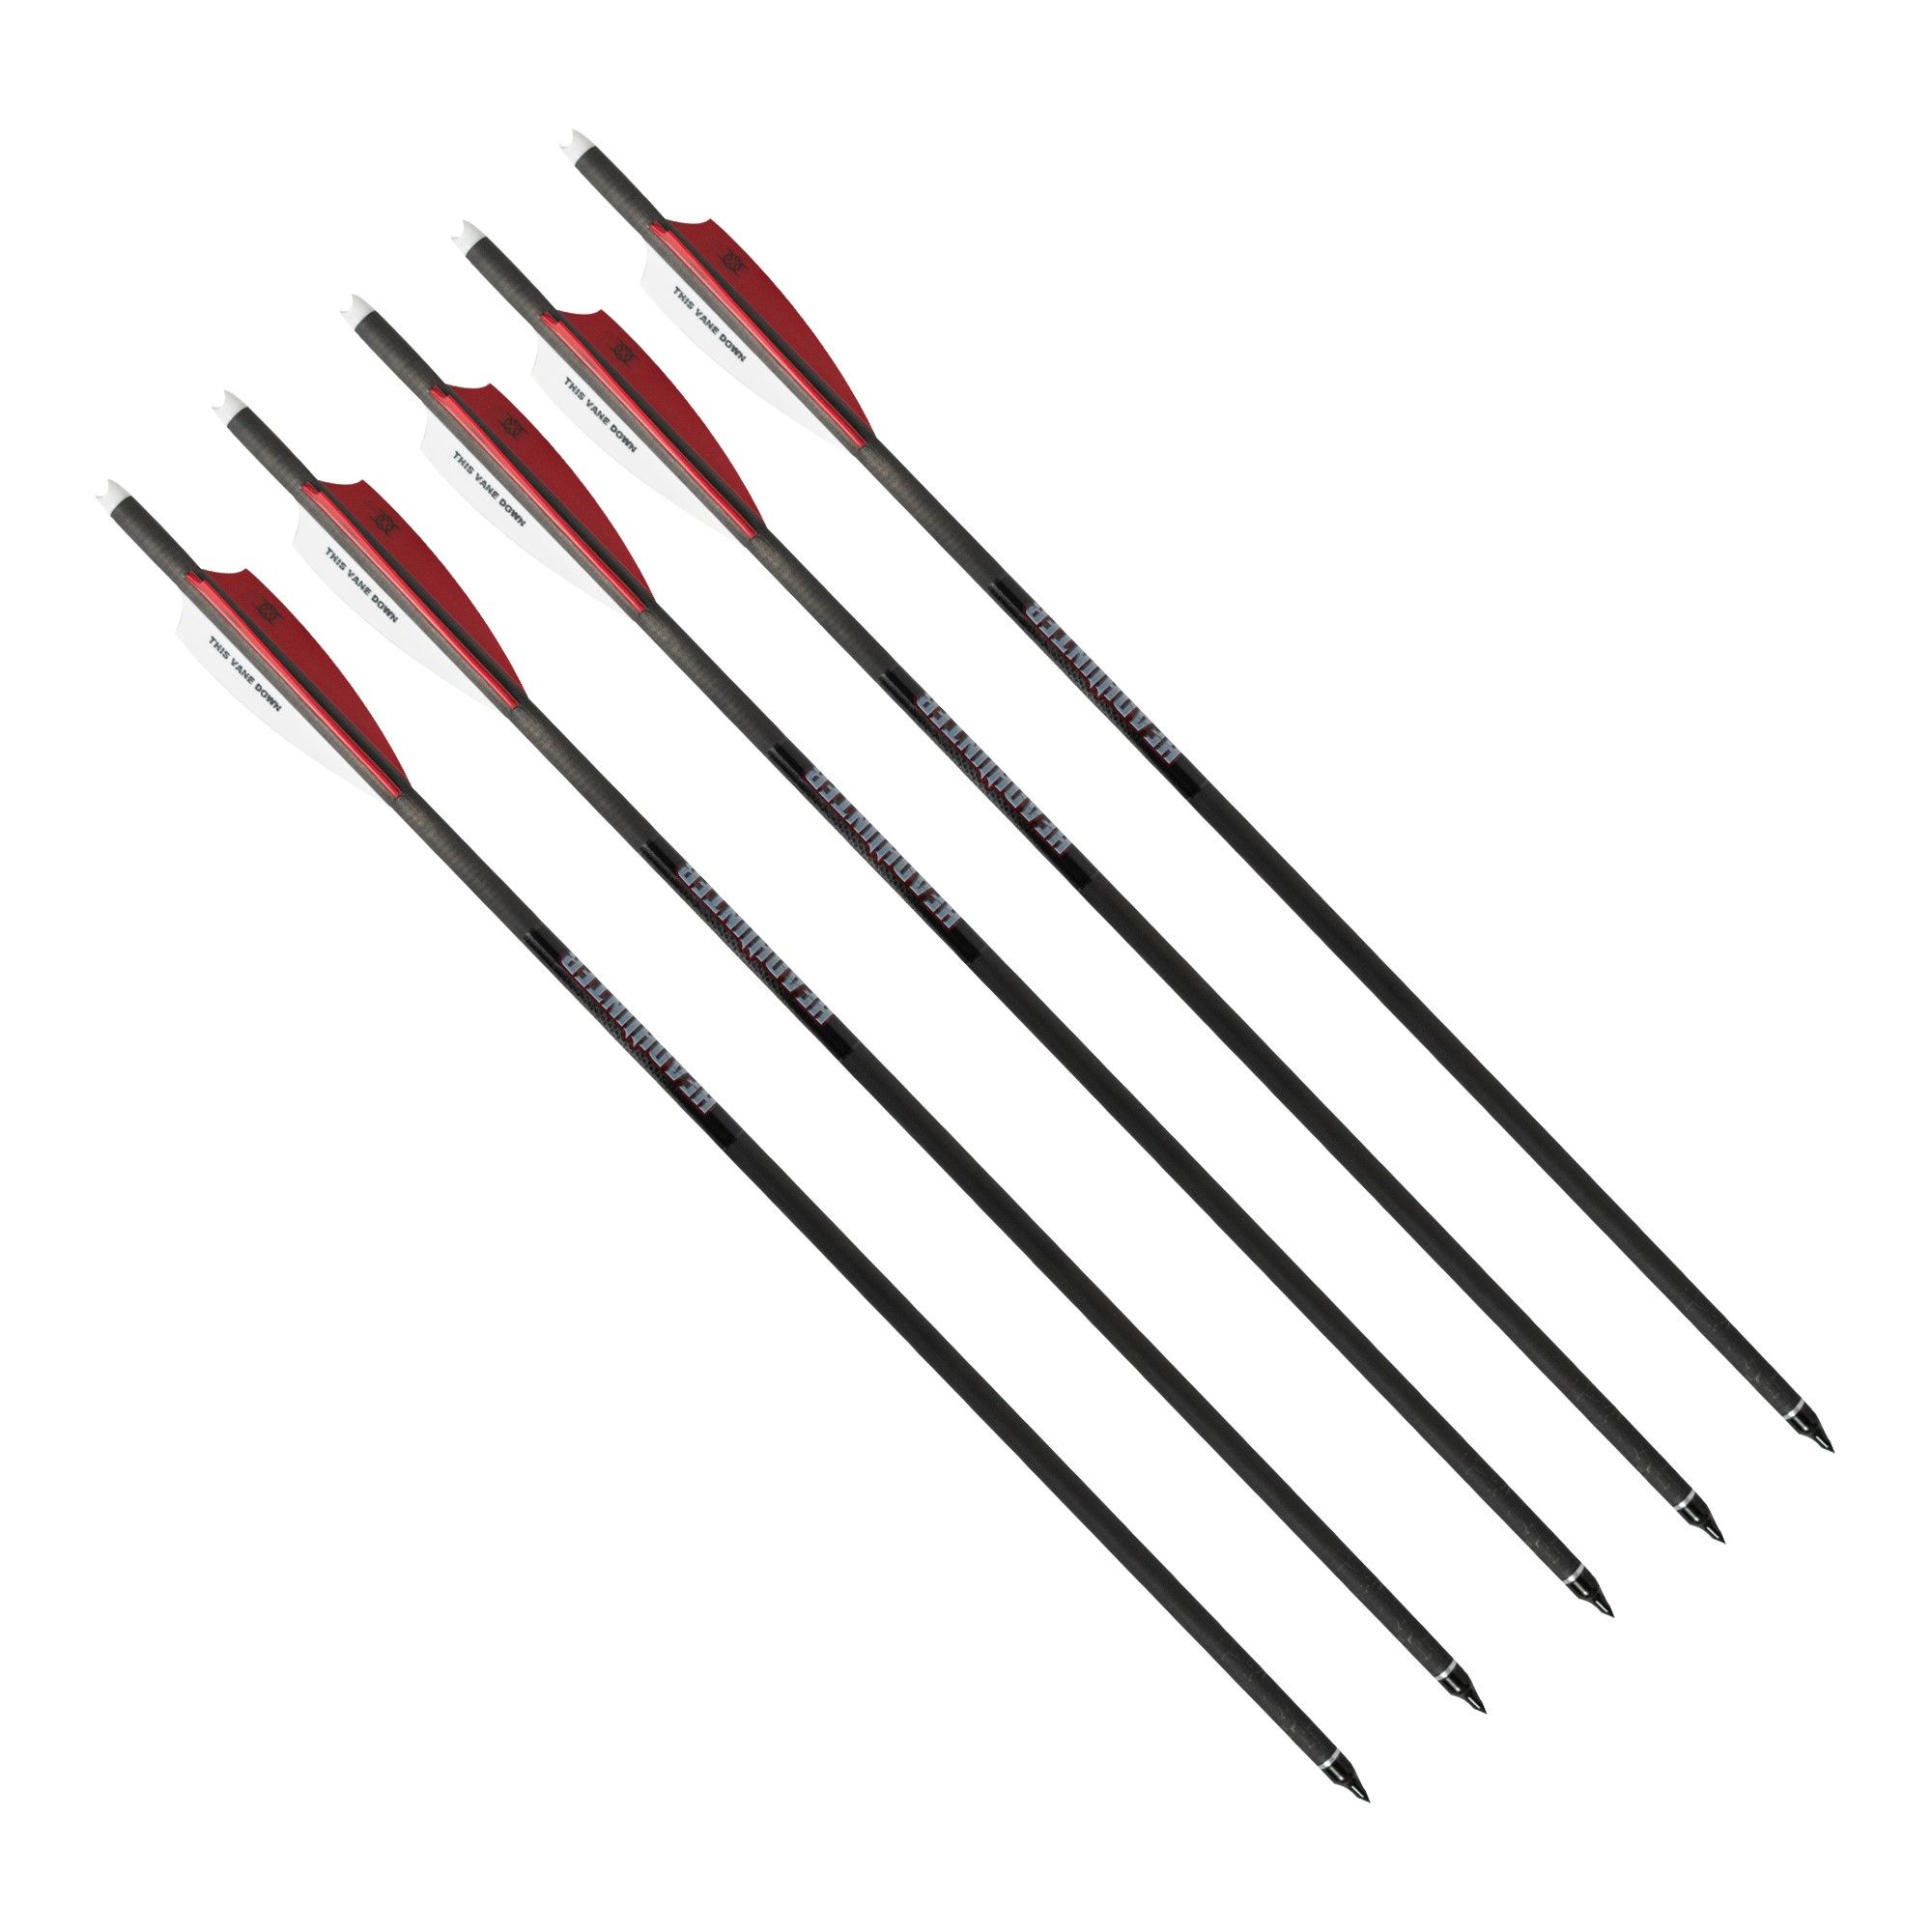 Barnett HeadHunter Outdoors Carbon Crossbow 20-Inch Arrows with Field Points (5 Pack) - image 2 of 5